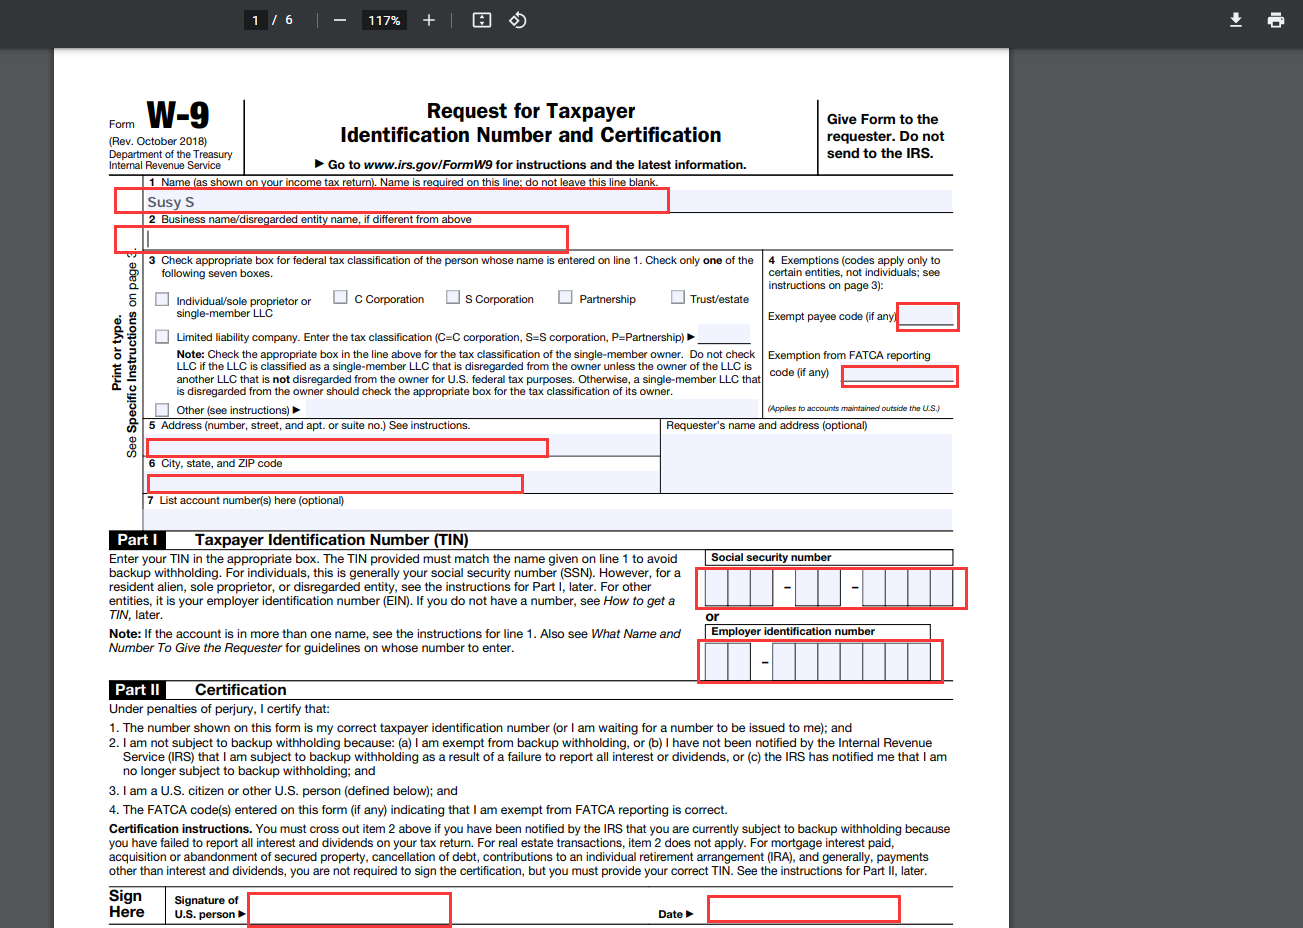 How to fill out a W9 form